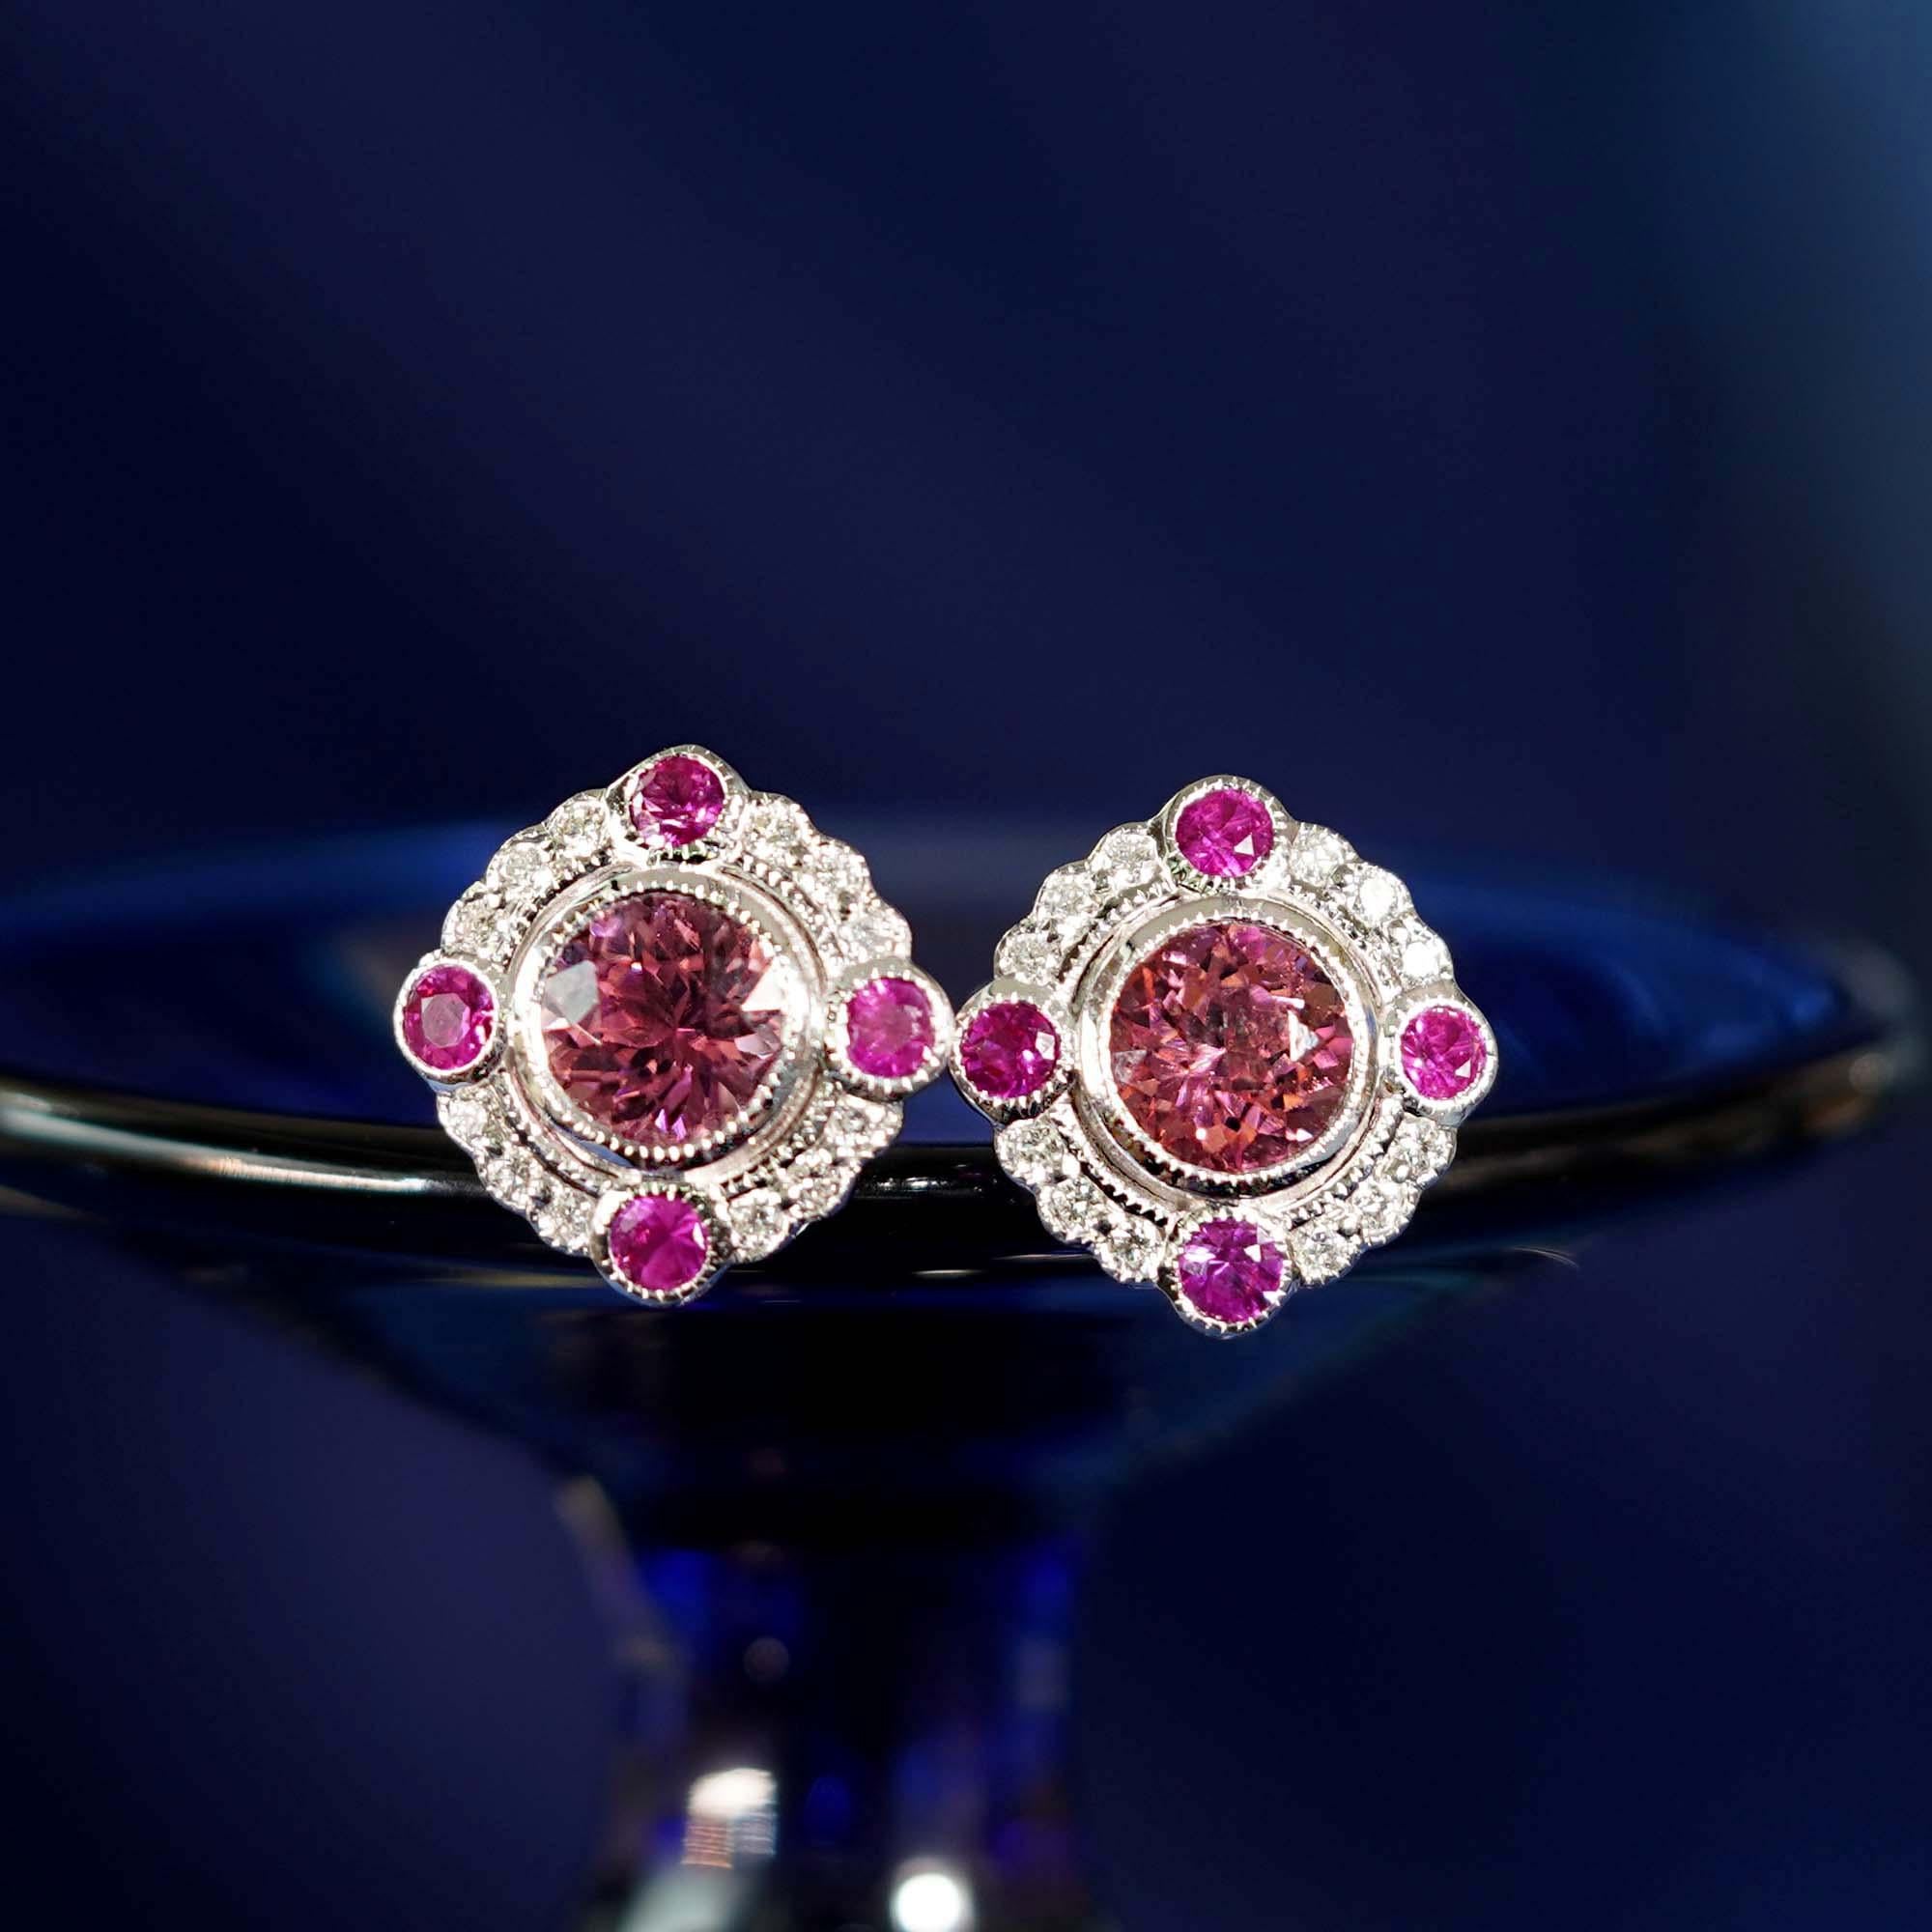 With pretty vintage styling, these earrings make the perfect finishing touch to an outfit. Featuring pink tourmaline in the center and four round rubies with tiny diamond halo that give a subtle, glittering appearance. The edges of the design have